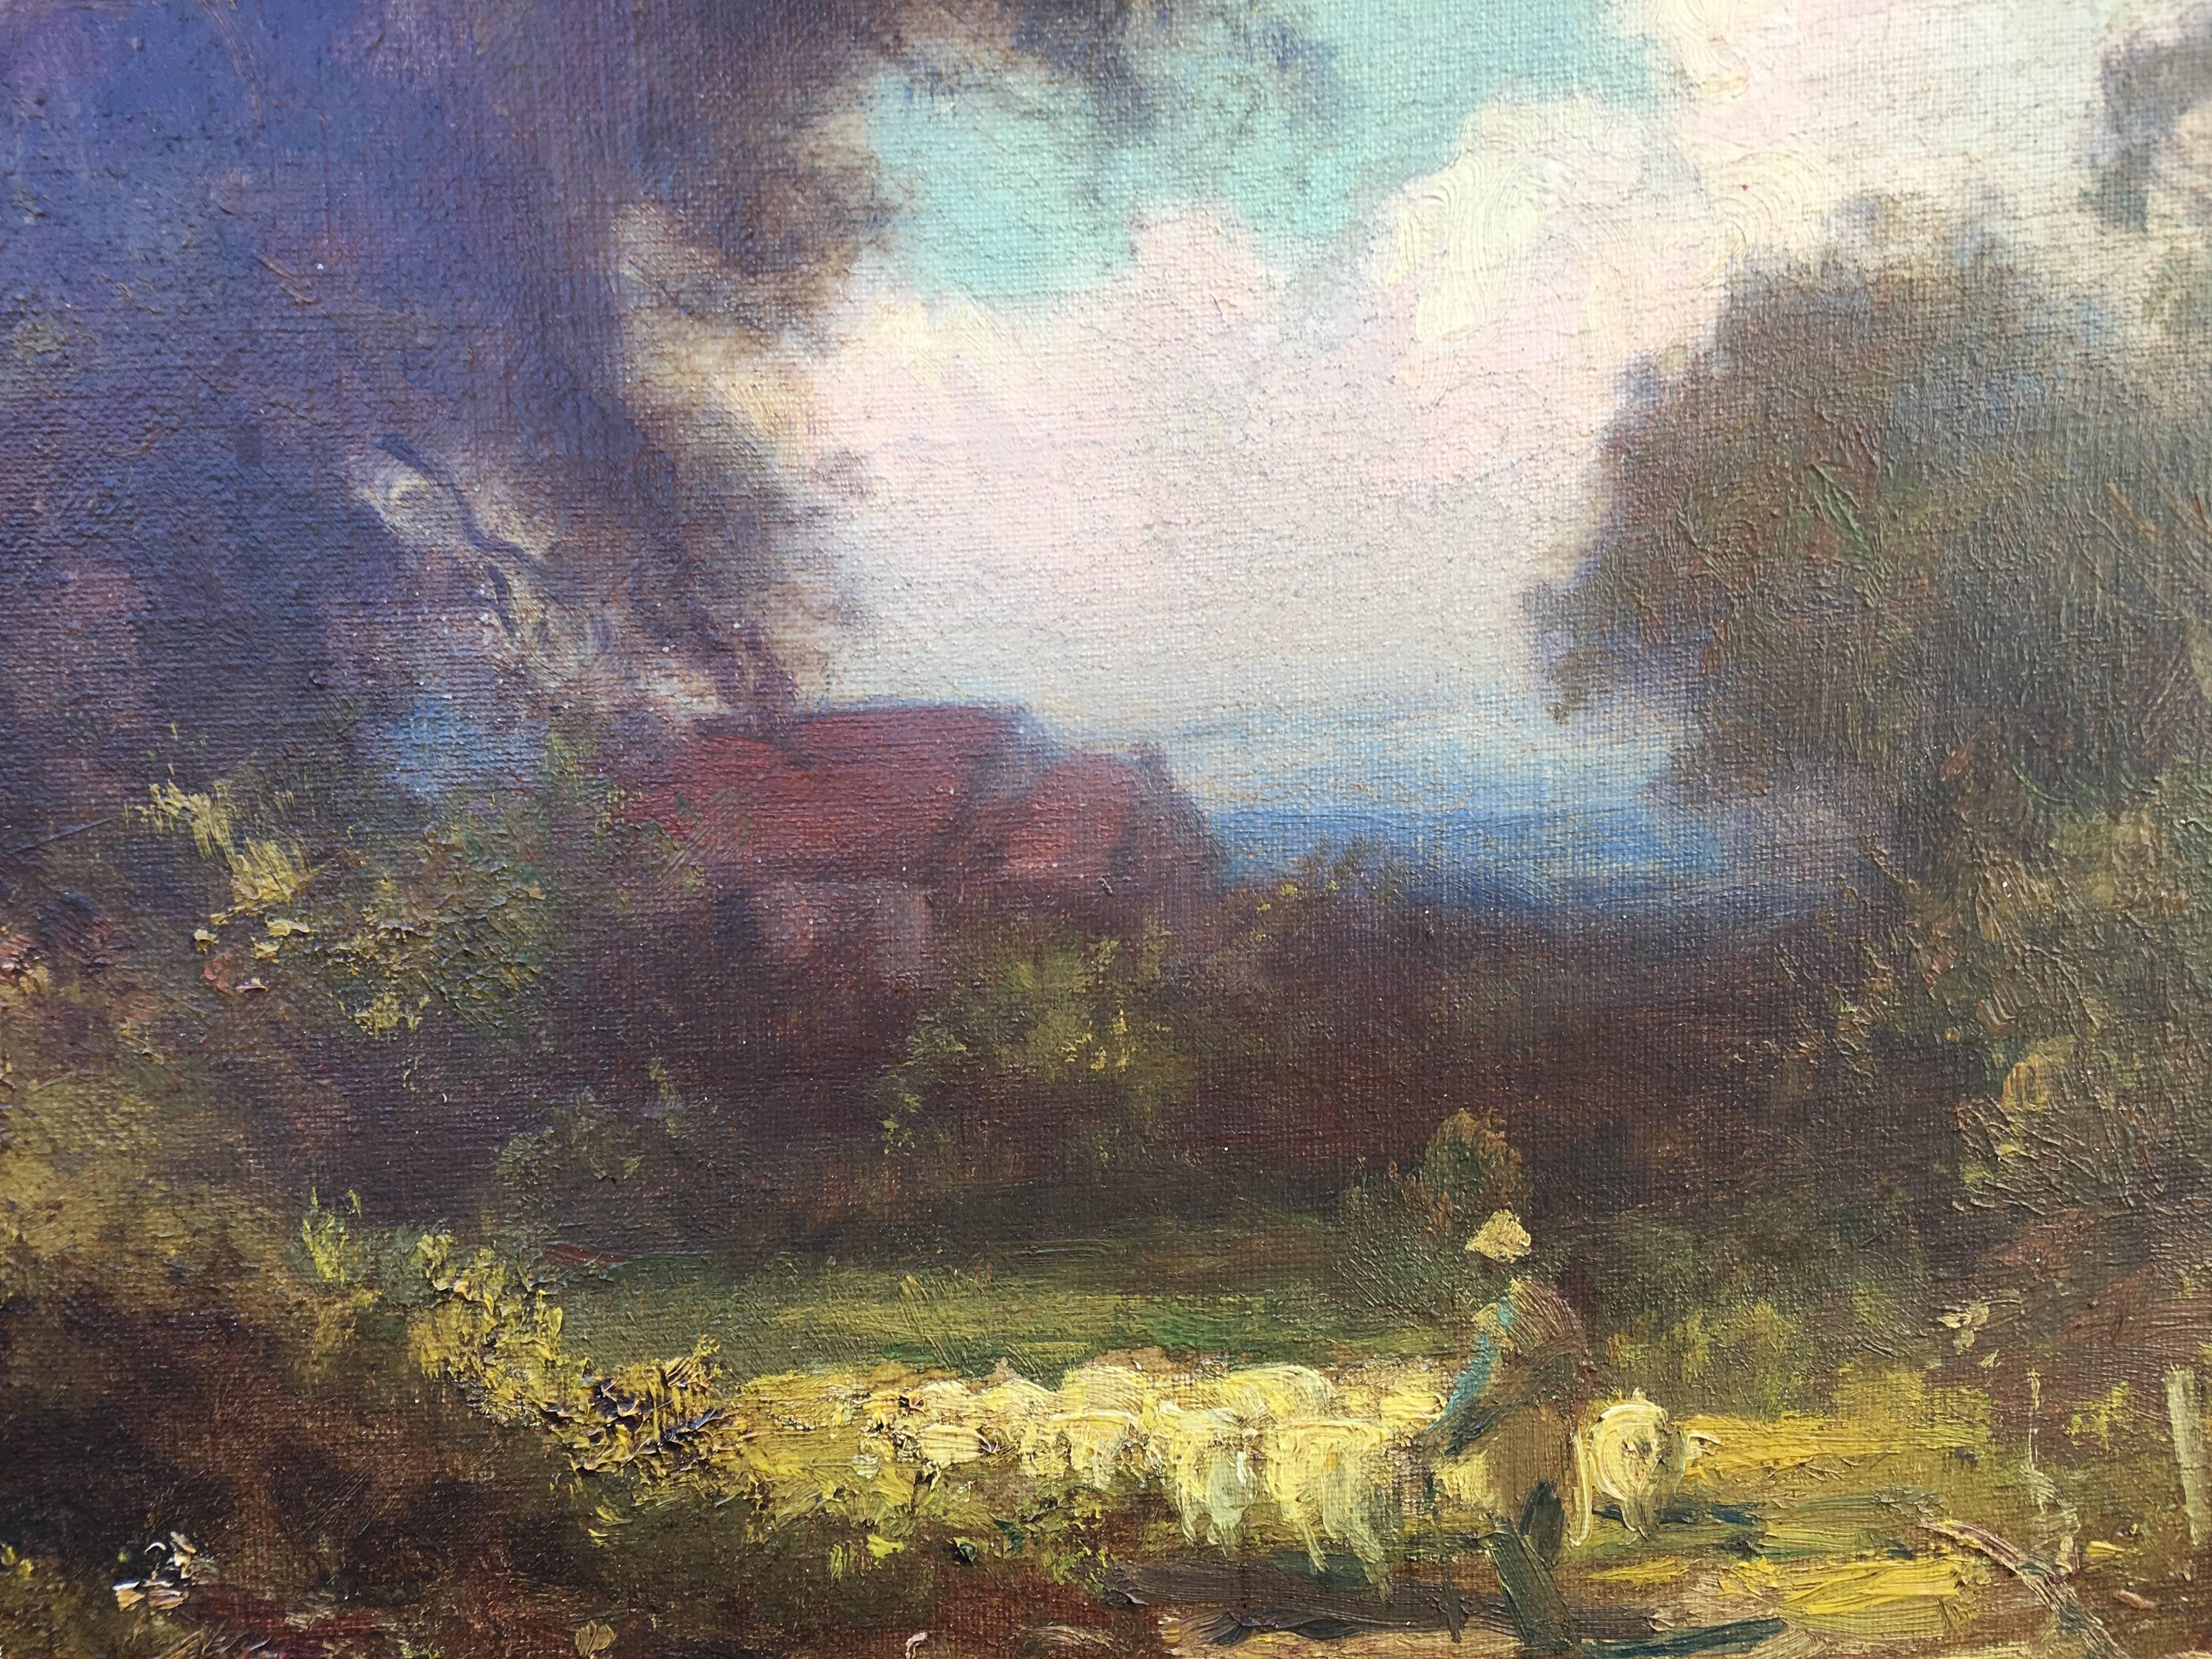 Shepherd Herding His Sheep Towards Home Through the Trees  - Painting by Gordon Coutts